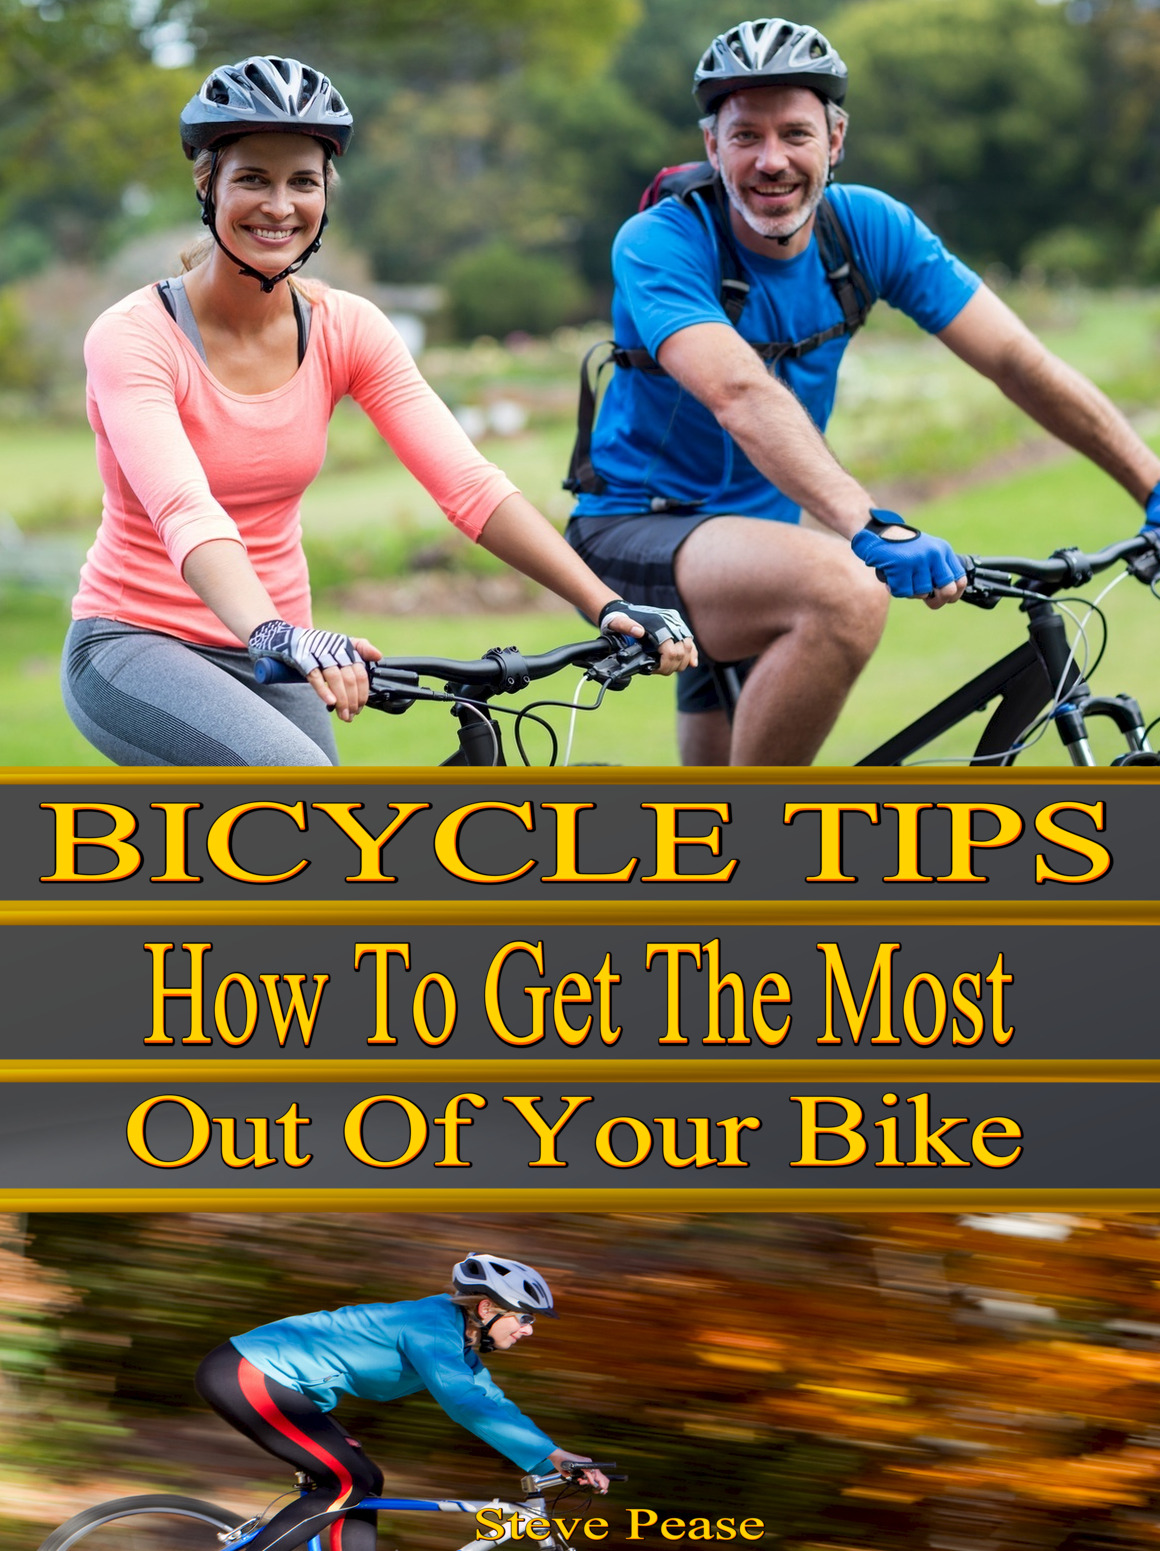 BICYCLE TIPS